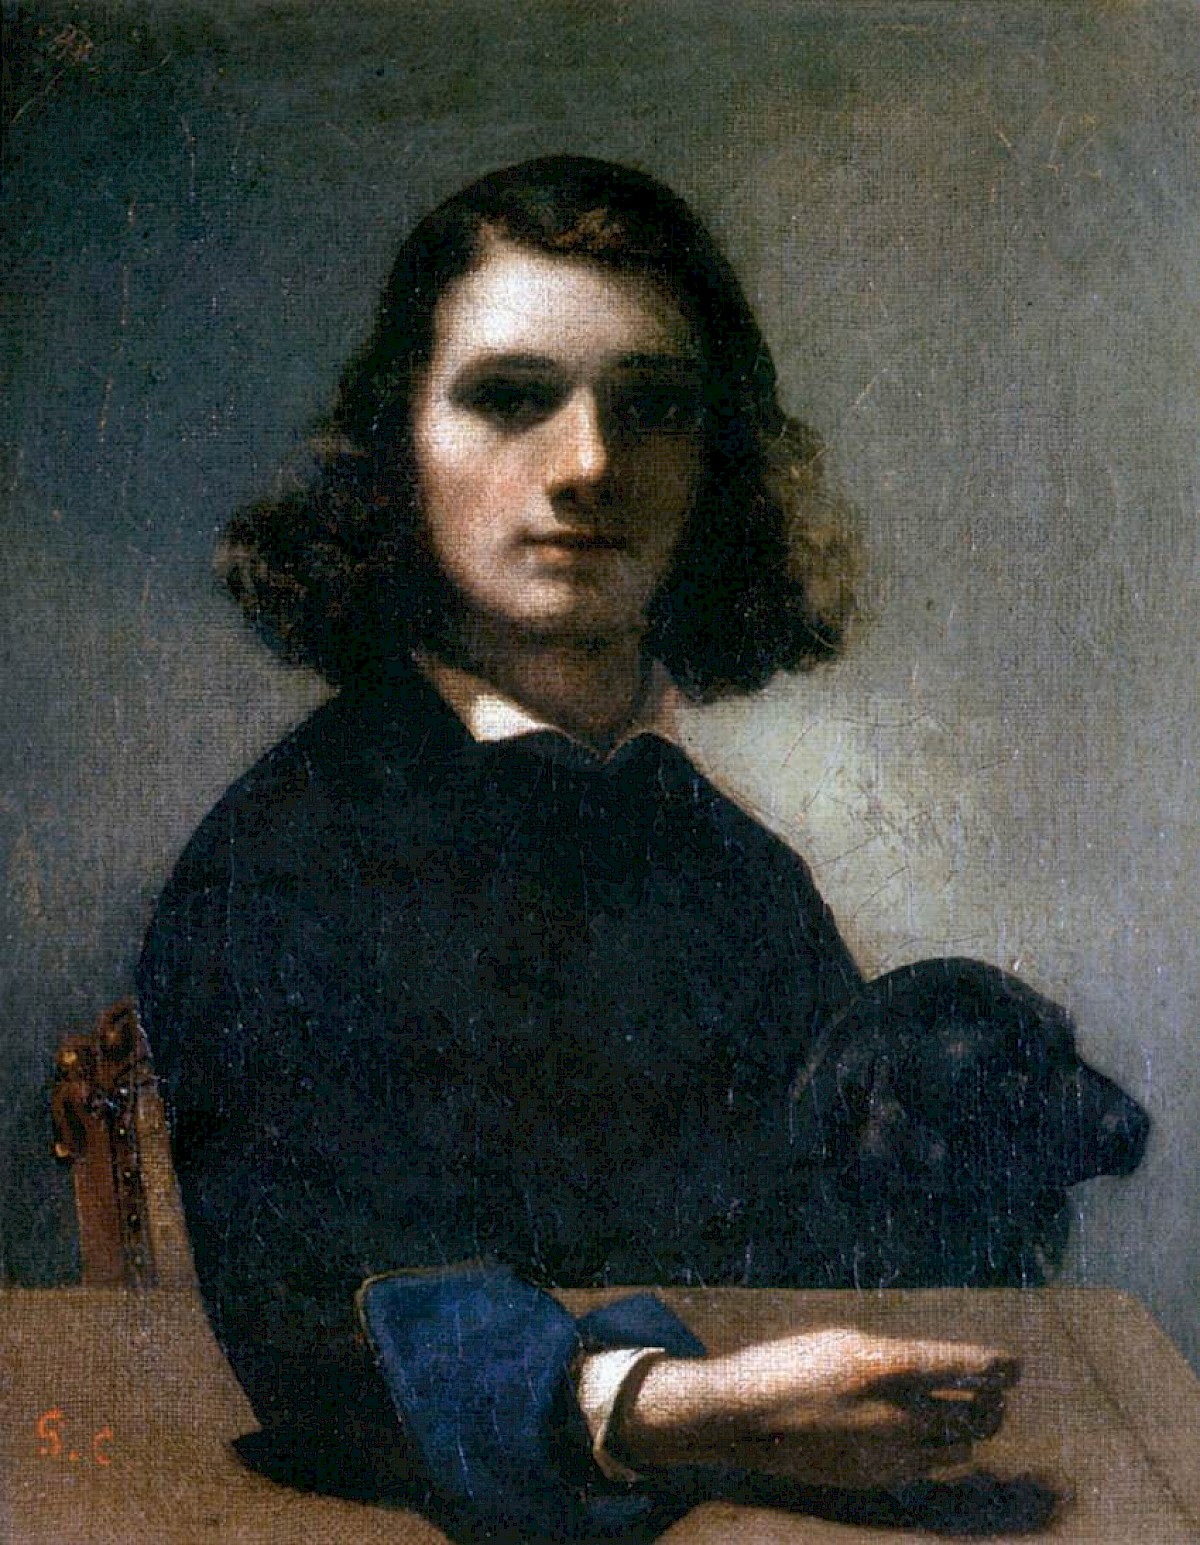 Self Portrait with Black Dog by Gustave Courbet